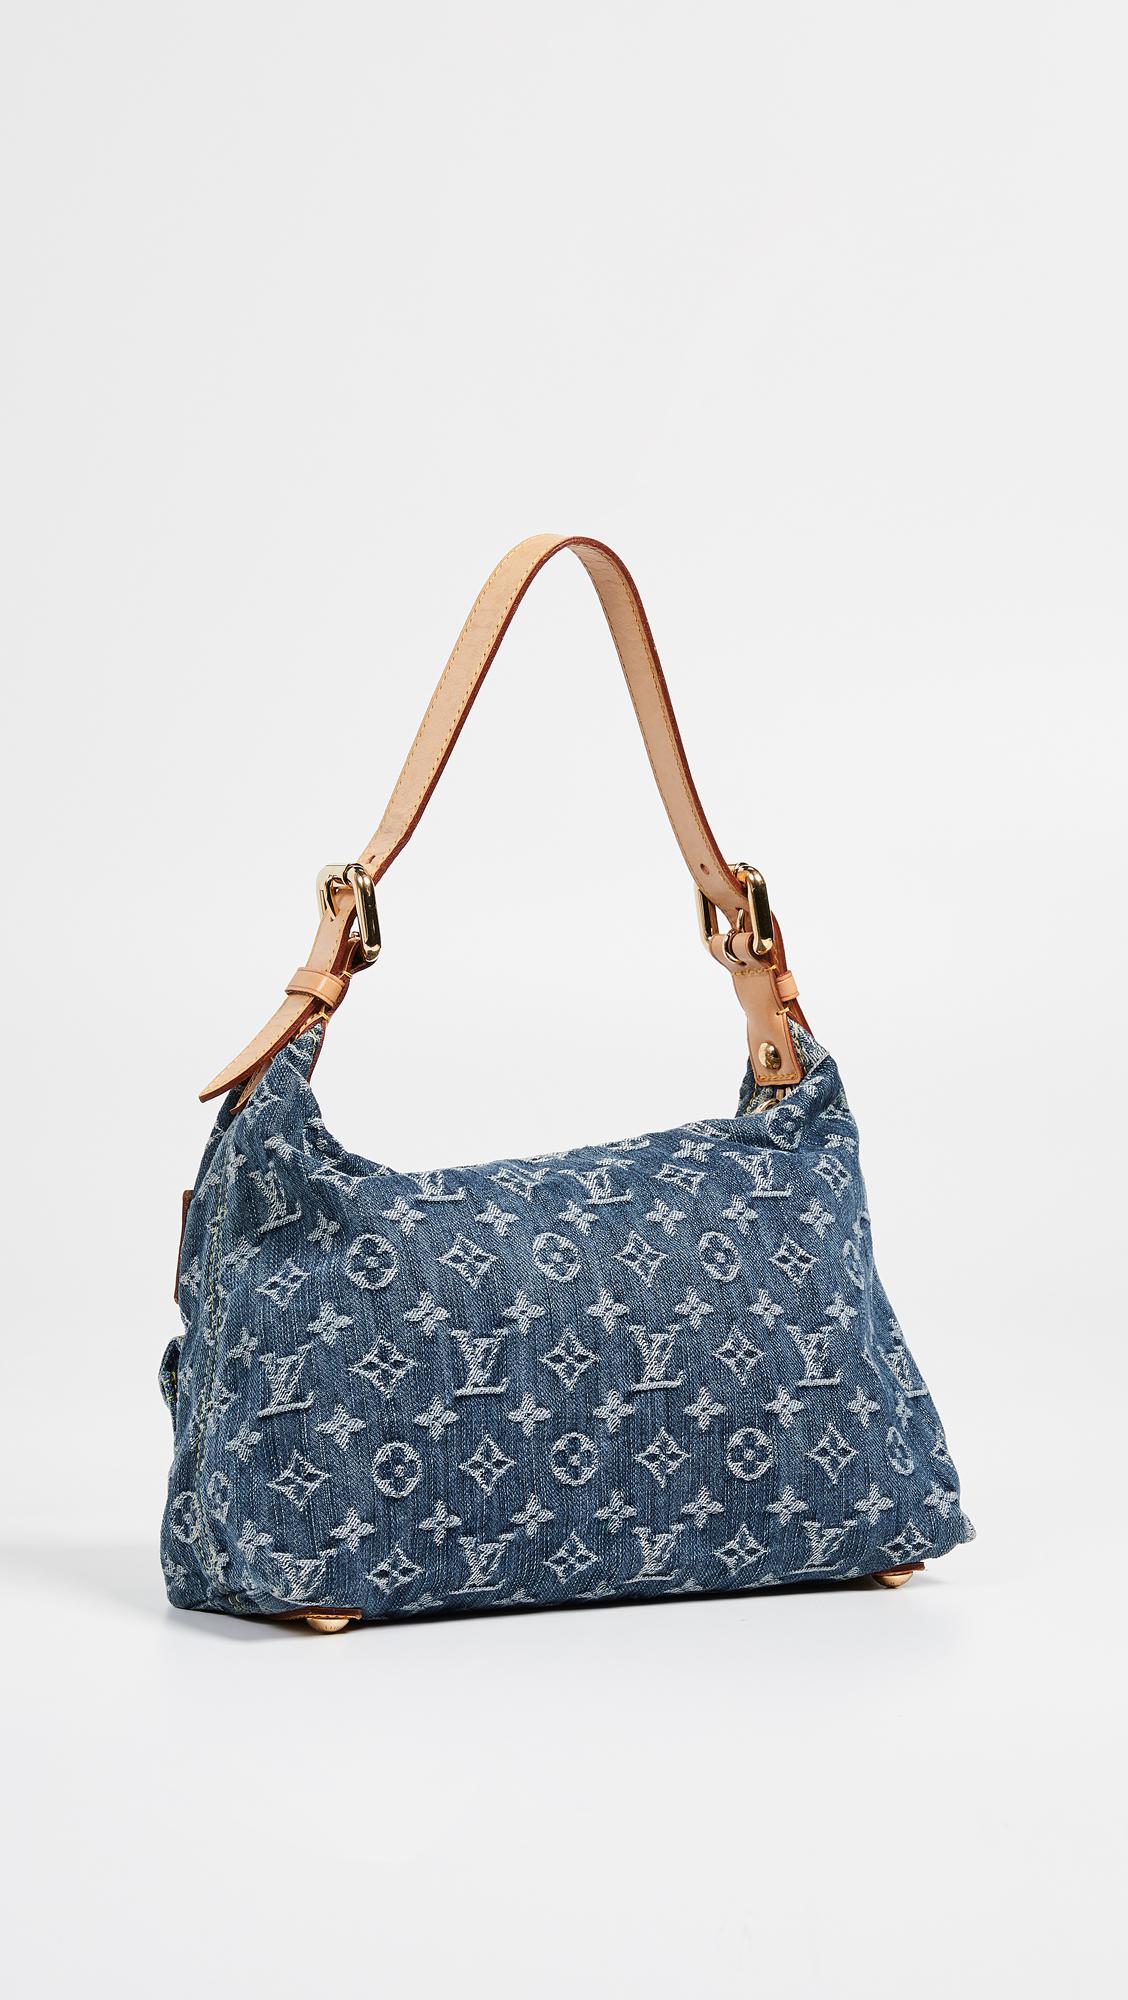 relovedeluxe products-Louis Vuitton Denim Baggy GM Shoulder Bag